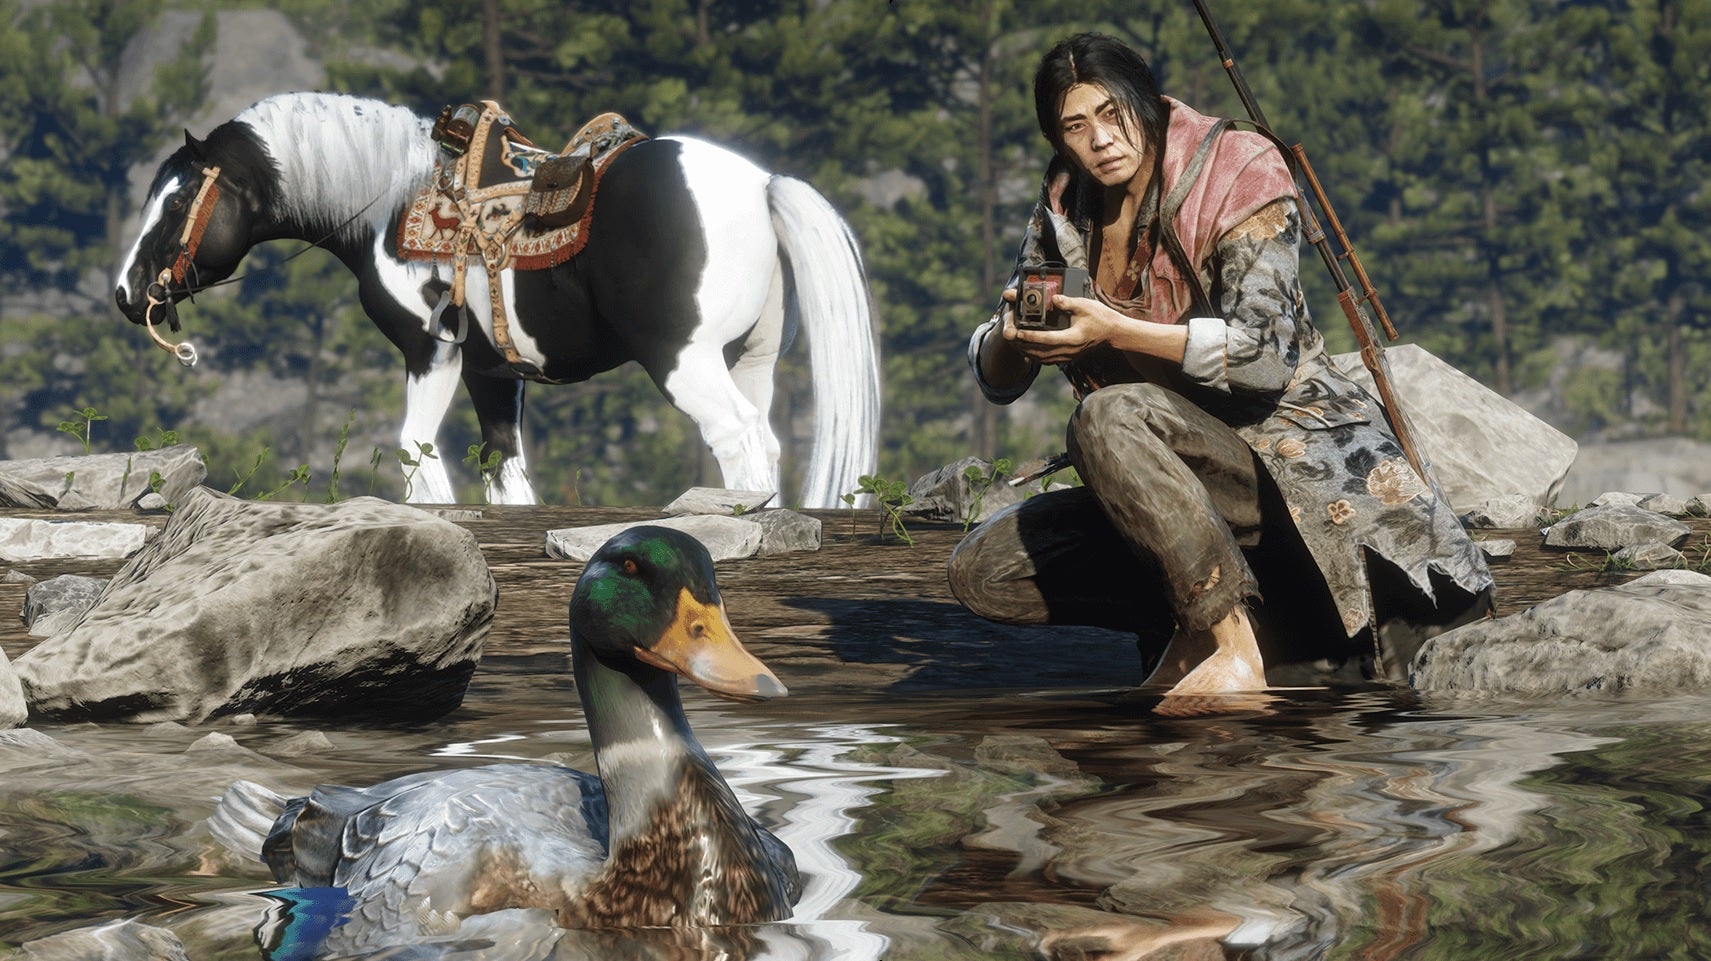 Red Dead Redemption 2 Online - A naturalist player crouches near the water holding a camera with a duck in the foreground while their horse waits in the background.